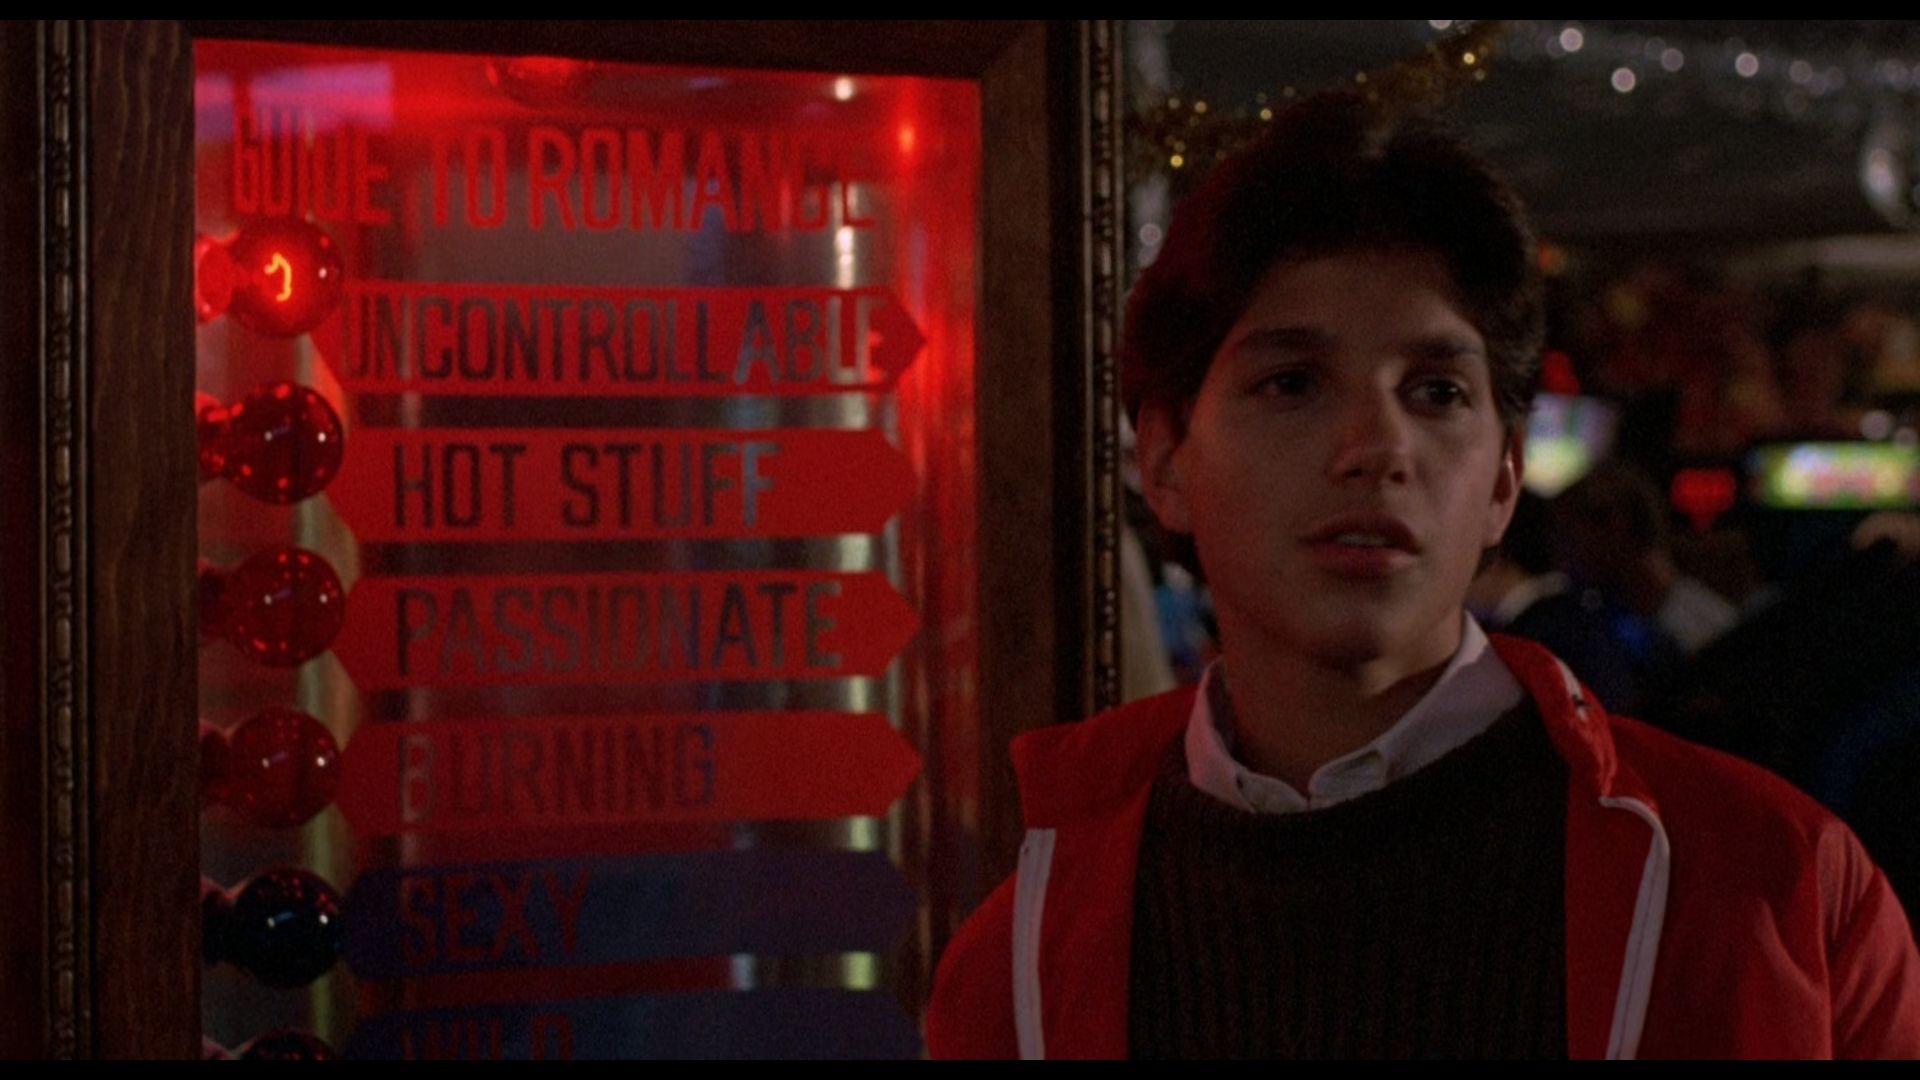 In the Karate Kid (1984), when Daniel is going to find Ali at the arcade, the love meter next to him is lit up at “Uncontrollable”